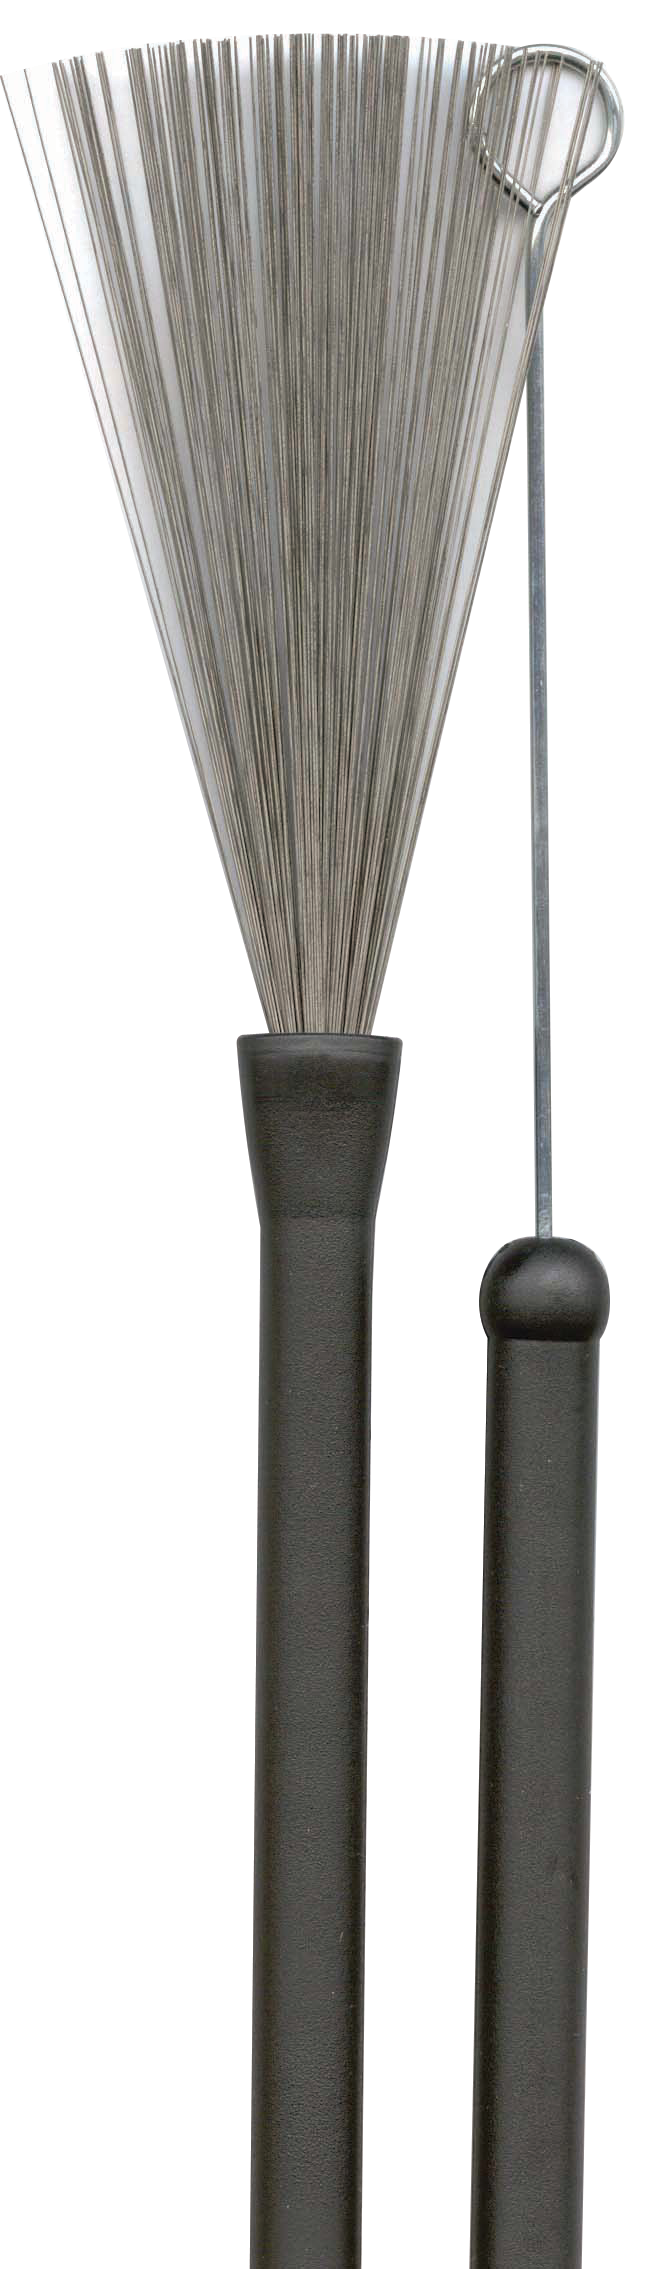 CPK Wire Brushes, Rubber Handle